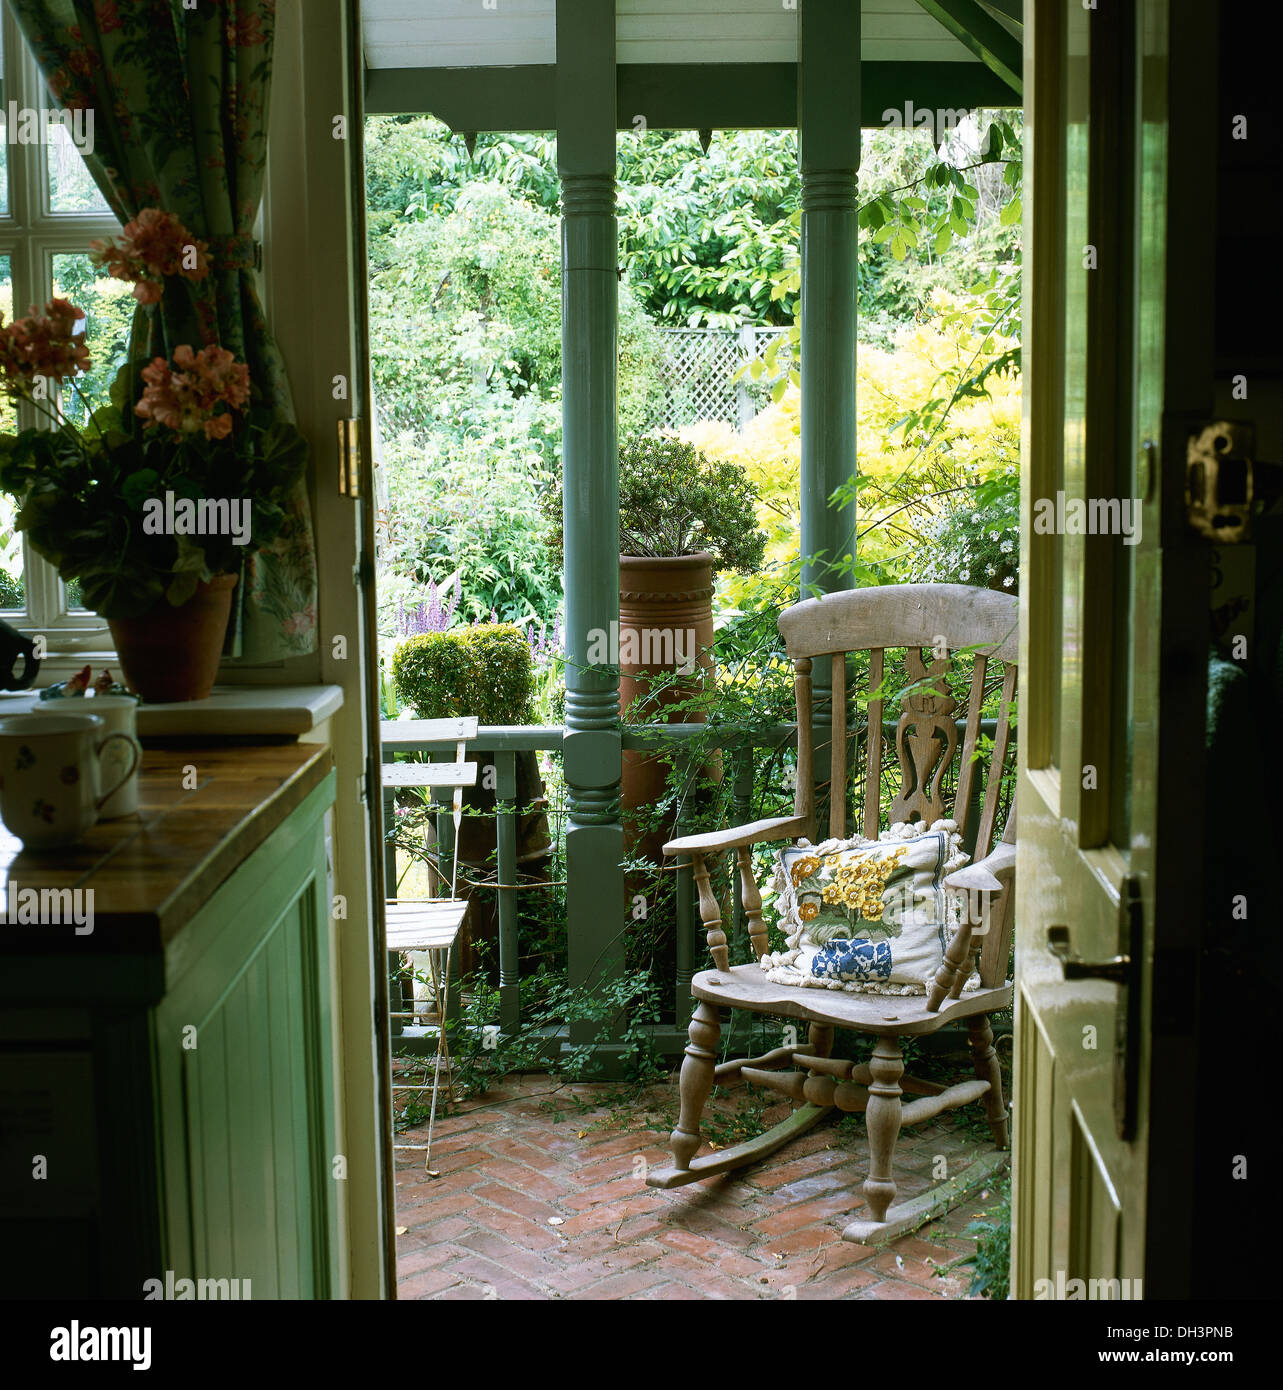 Country kitchen with open door and view of rocking chair on veranda Stock Photo